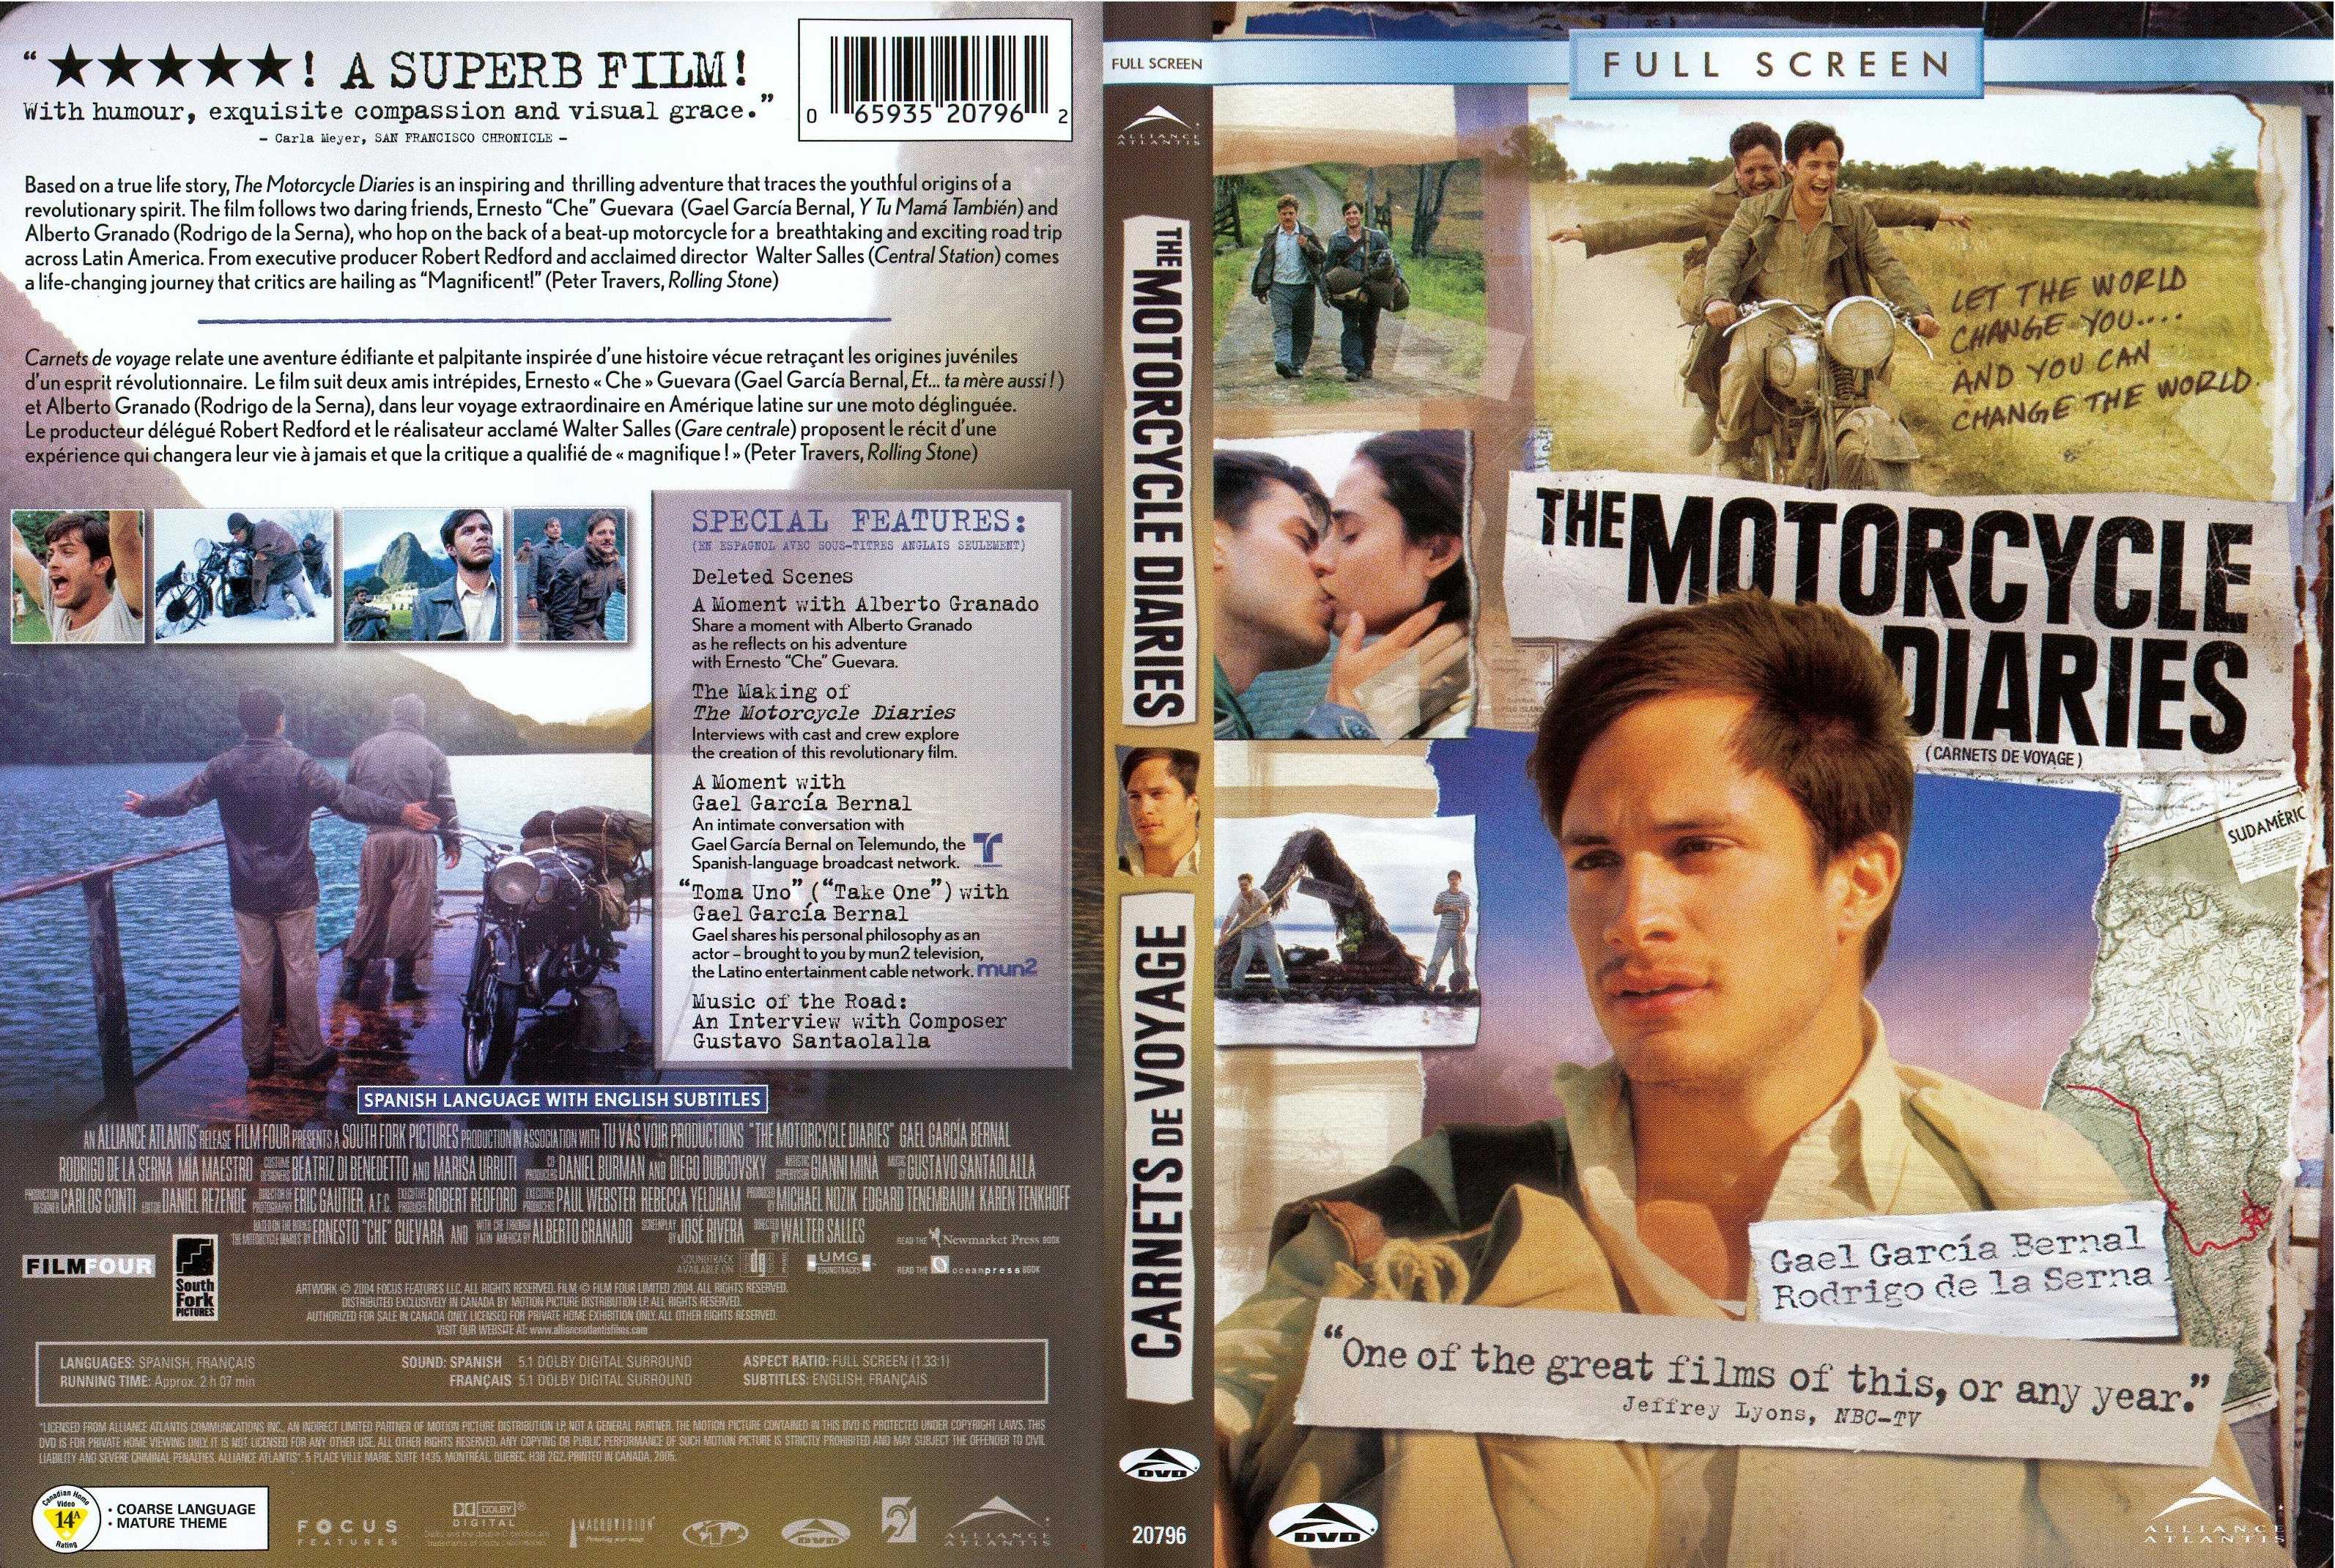 Jaquette DVD The motorcycle diaries